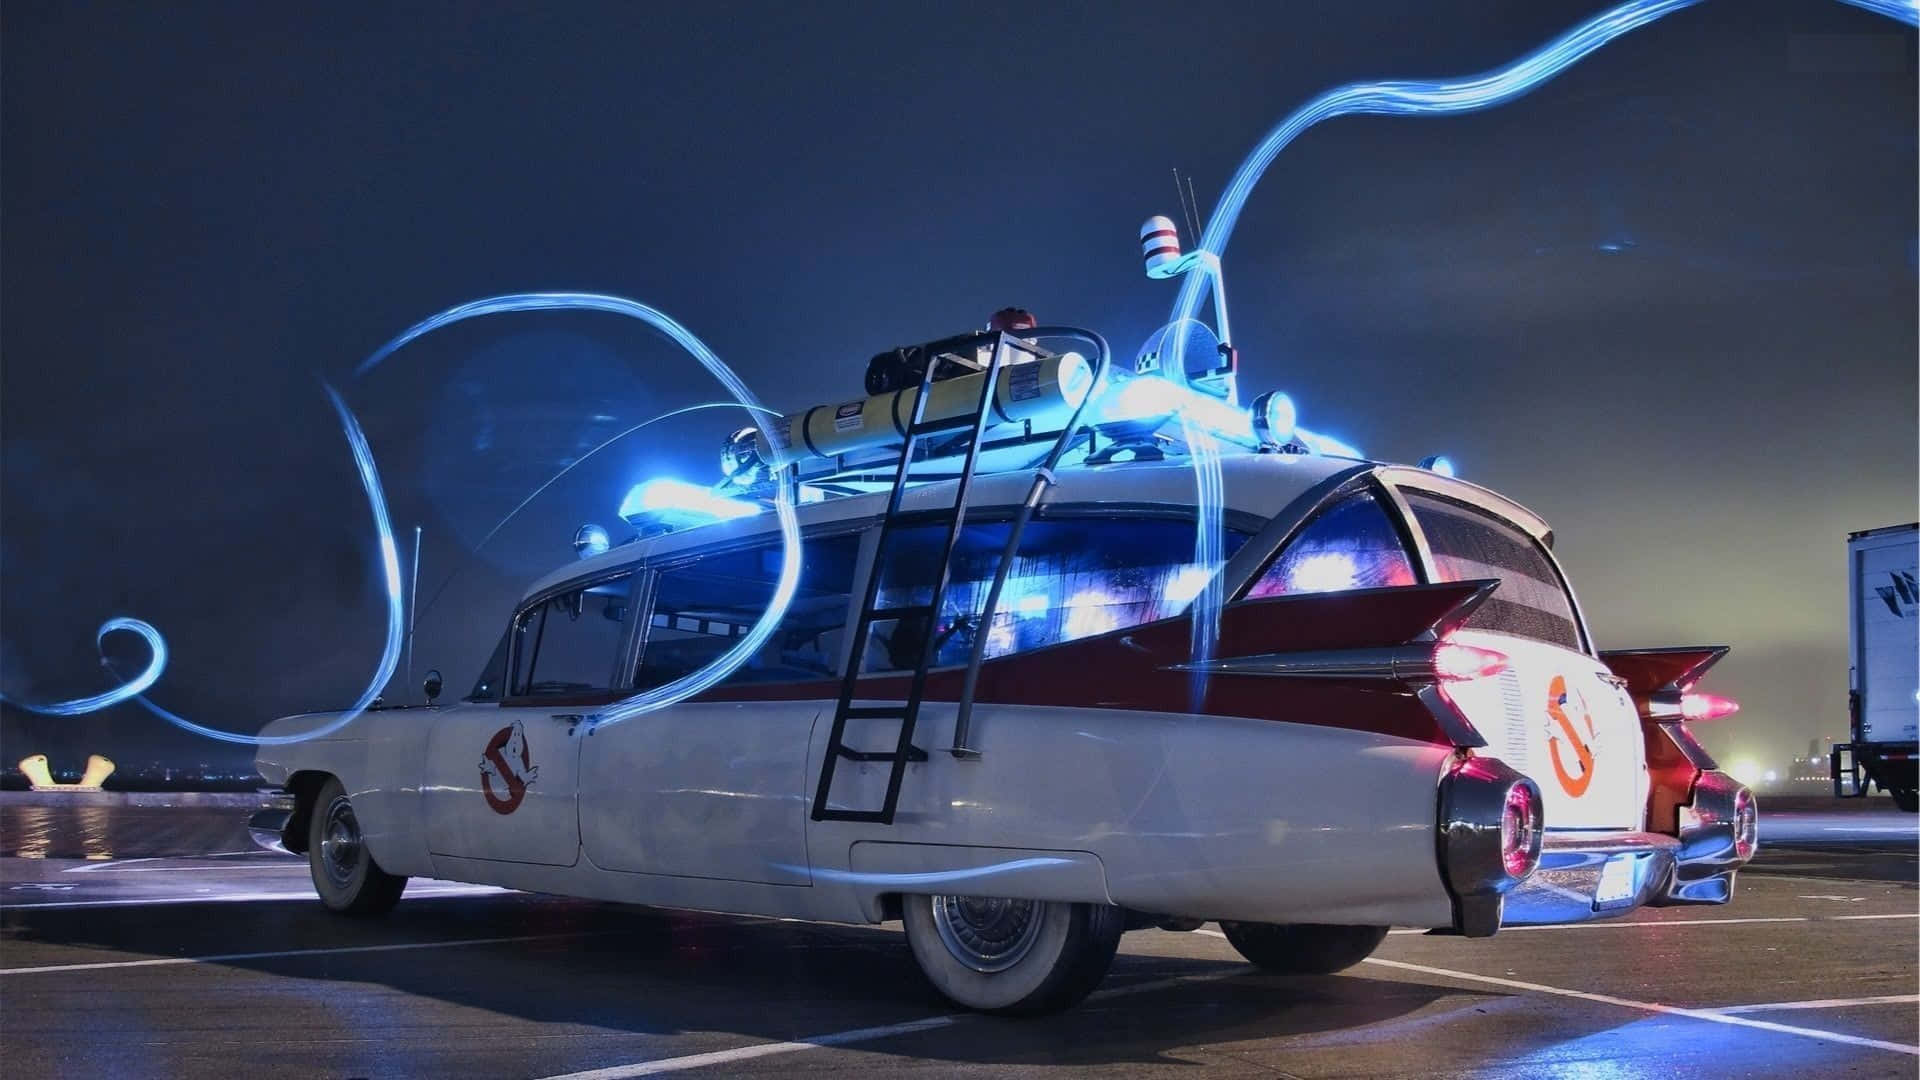 Stand up and fight ghosts with the Ghostbusters